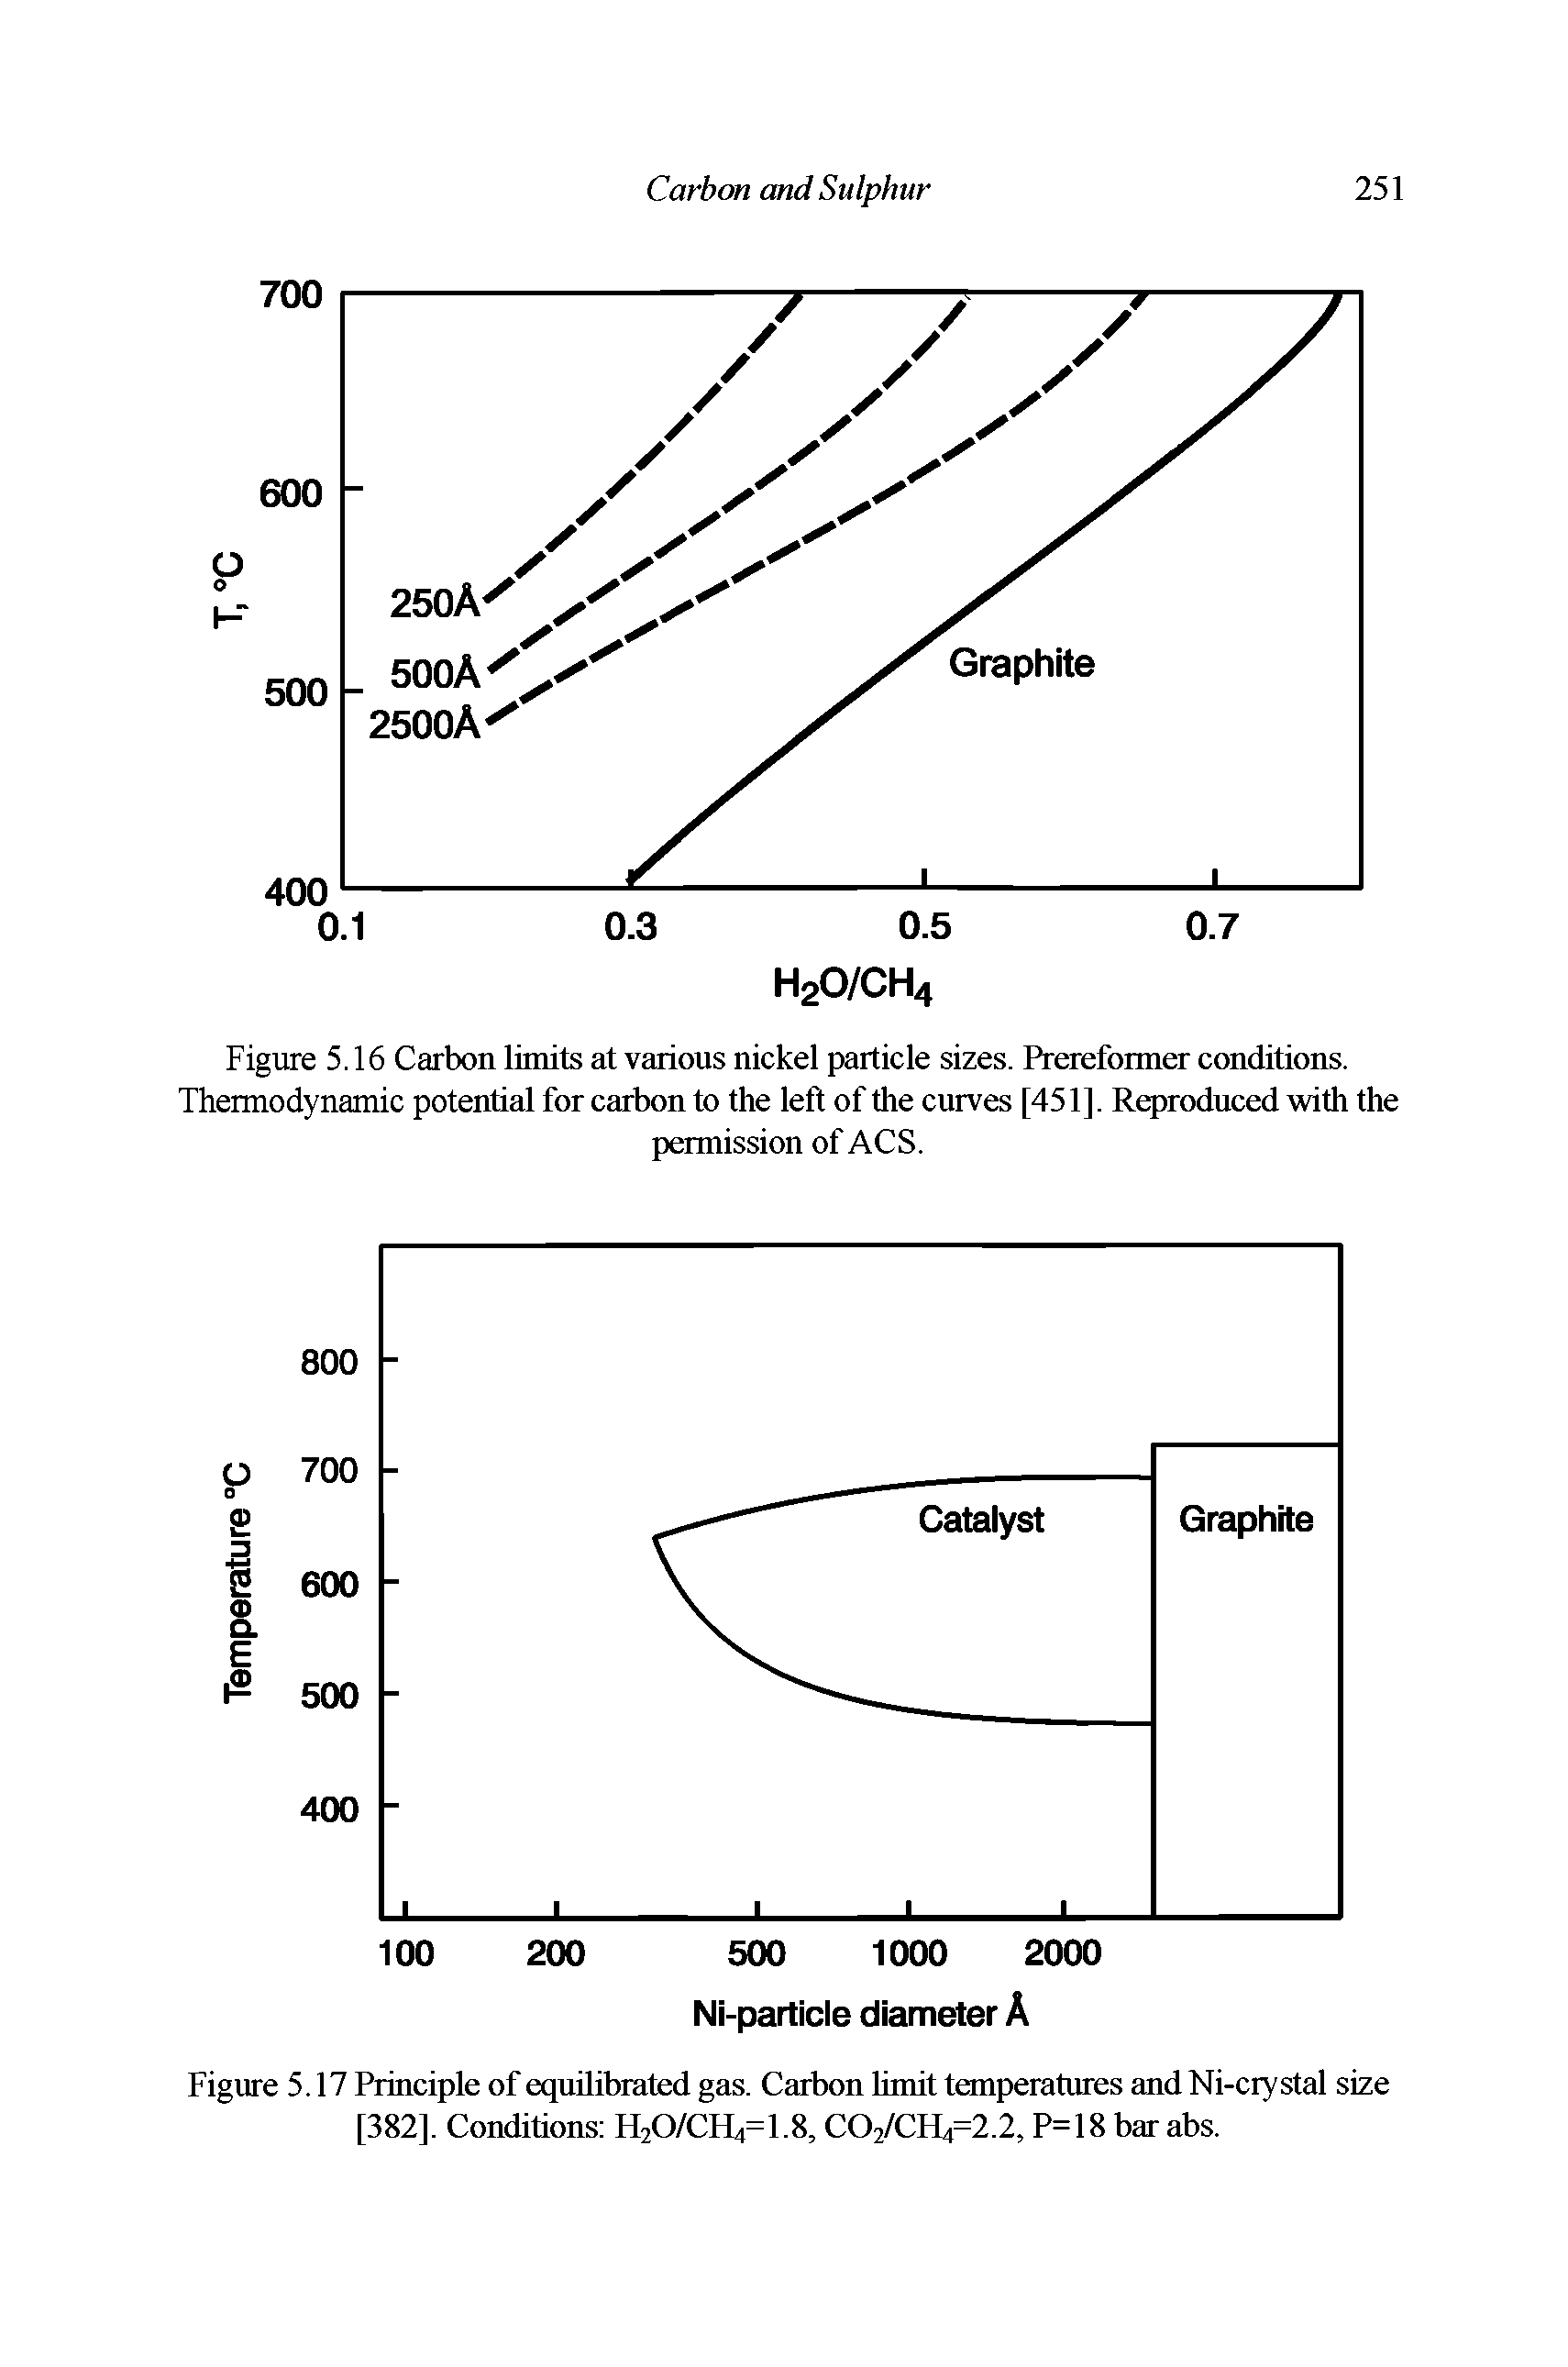 Figure 5.17 Principle of equilibrated gas. Carbon limit temperatures and Ni-crystal size [382]. Conditions H20/CFLt=1.8, C02/CH =2.2, P=18 bar abs.